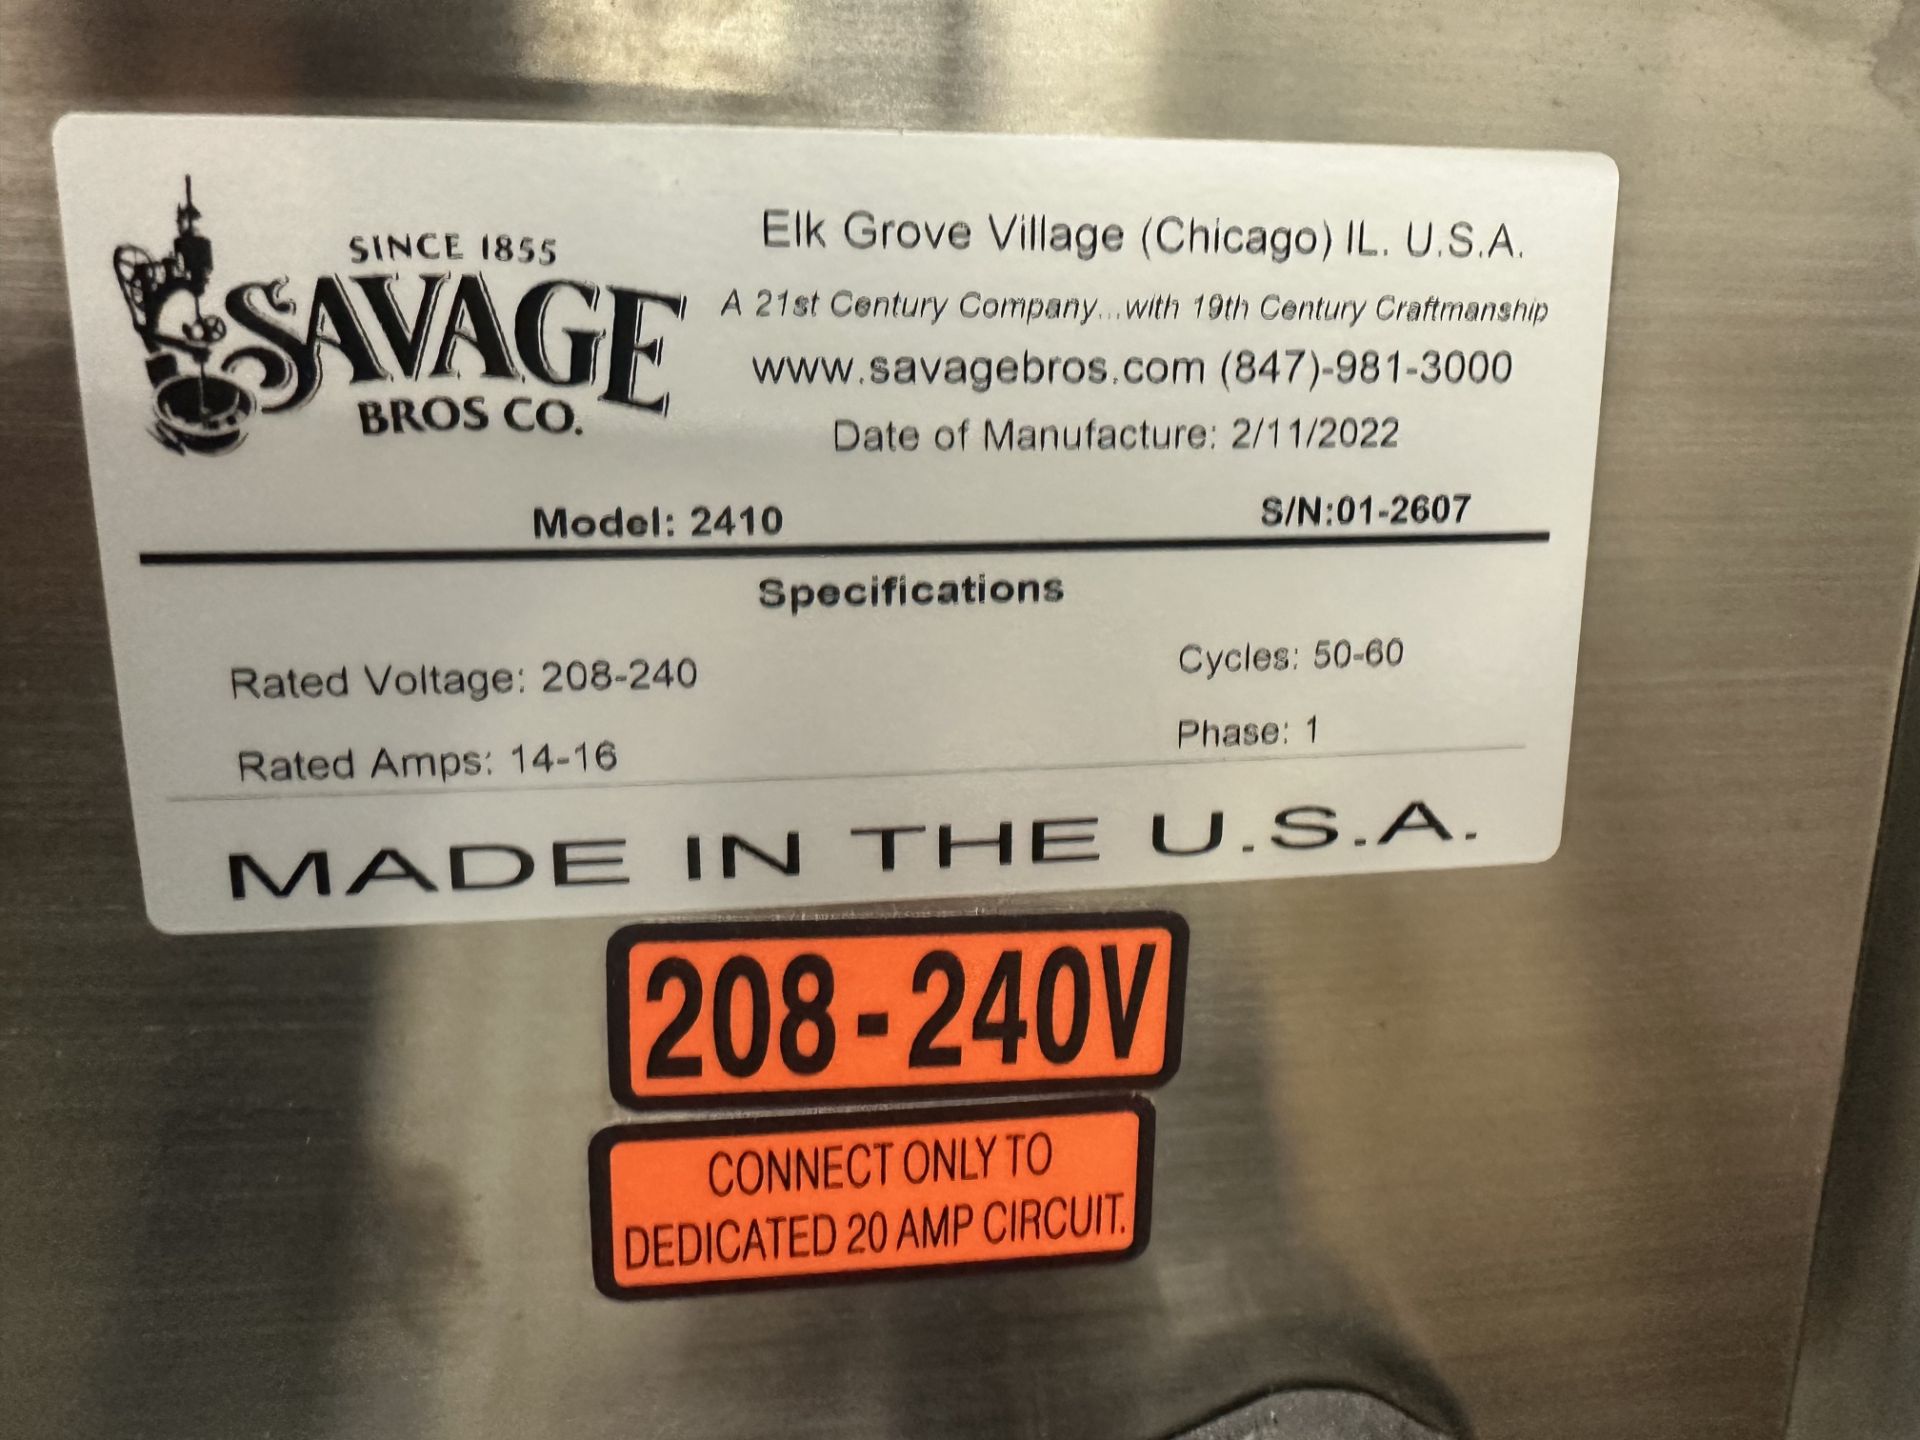 New/Unused Savage Bros Table-Top Automatic Cooker Mixer w/ PLC Control. Model 2410 / FireMixer-14 - Image 5 of 12